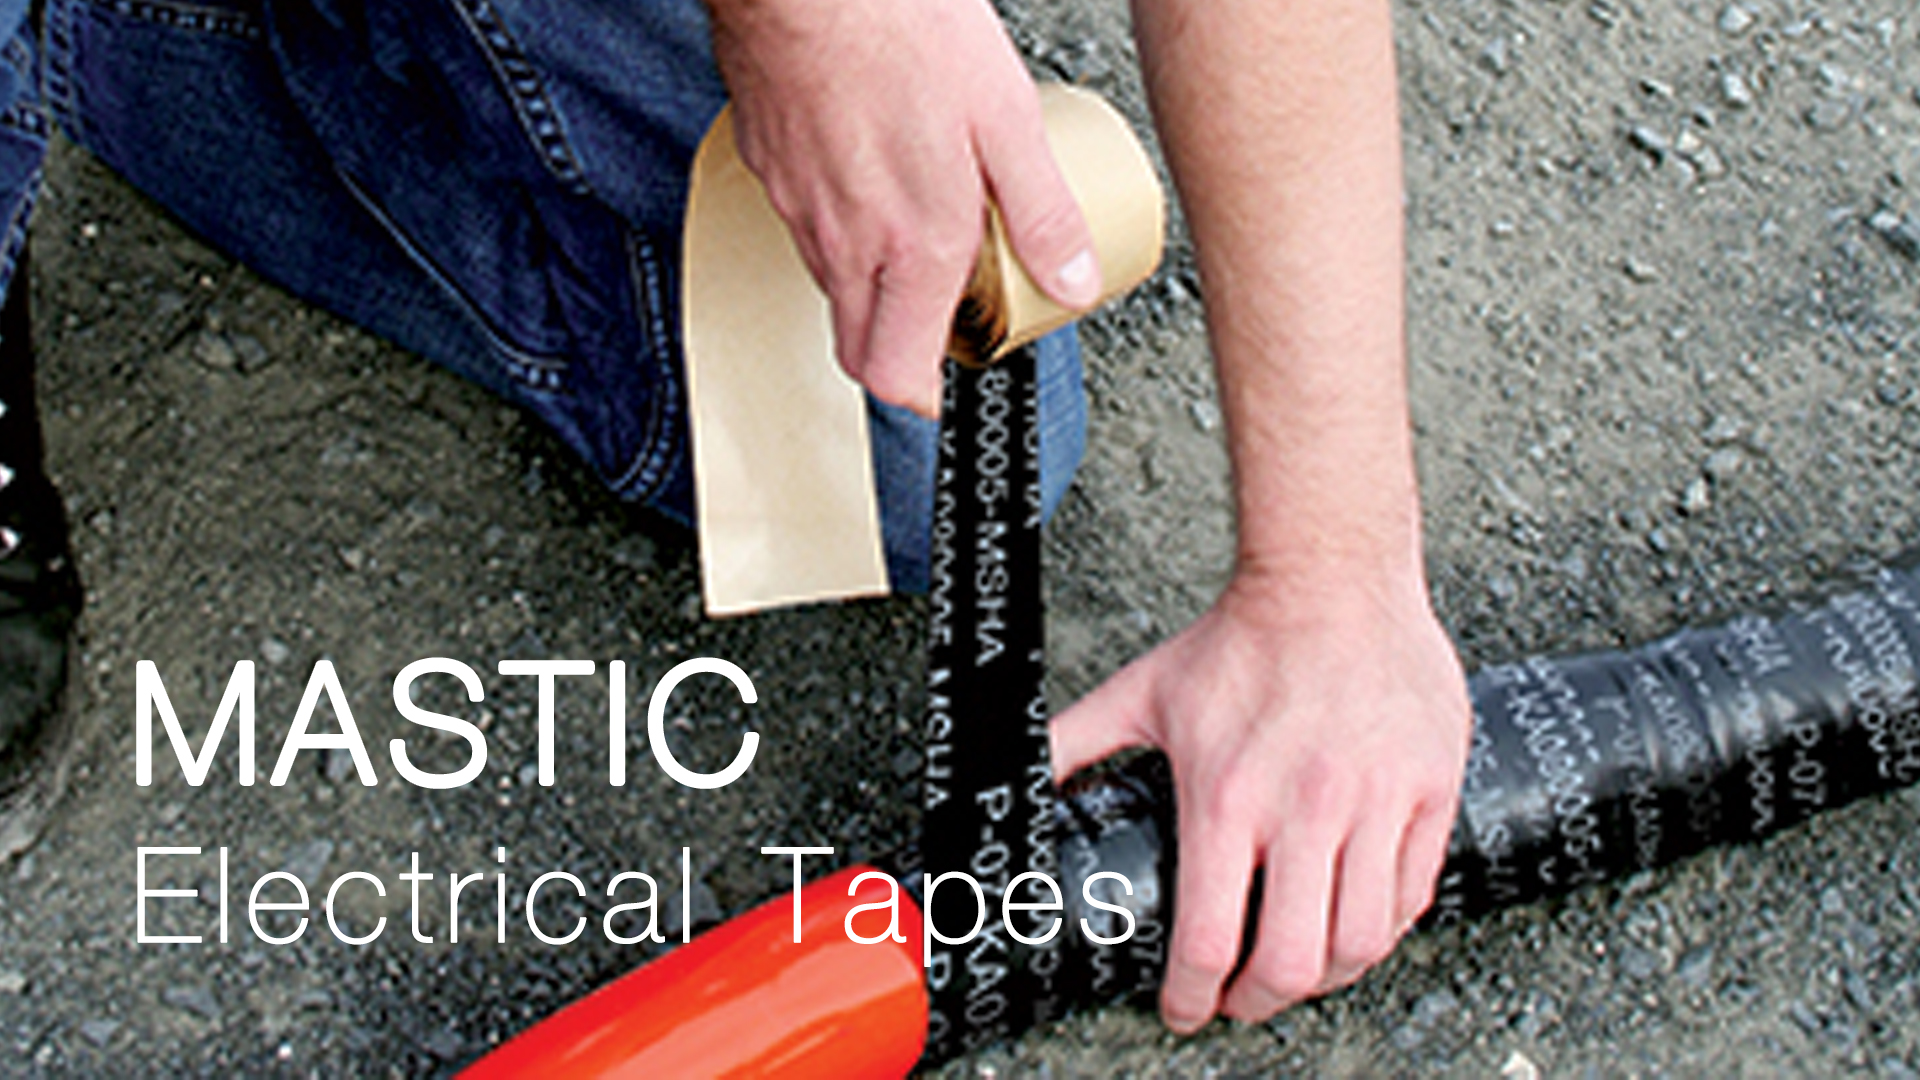 3M Mastic Electrical Tapes